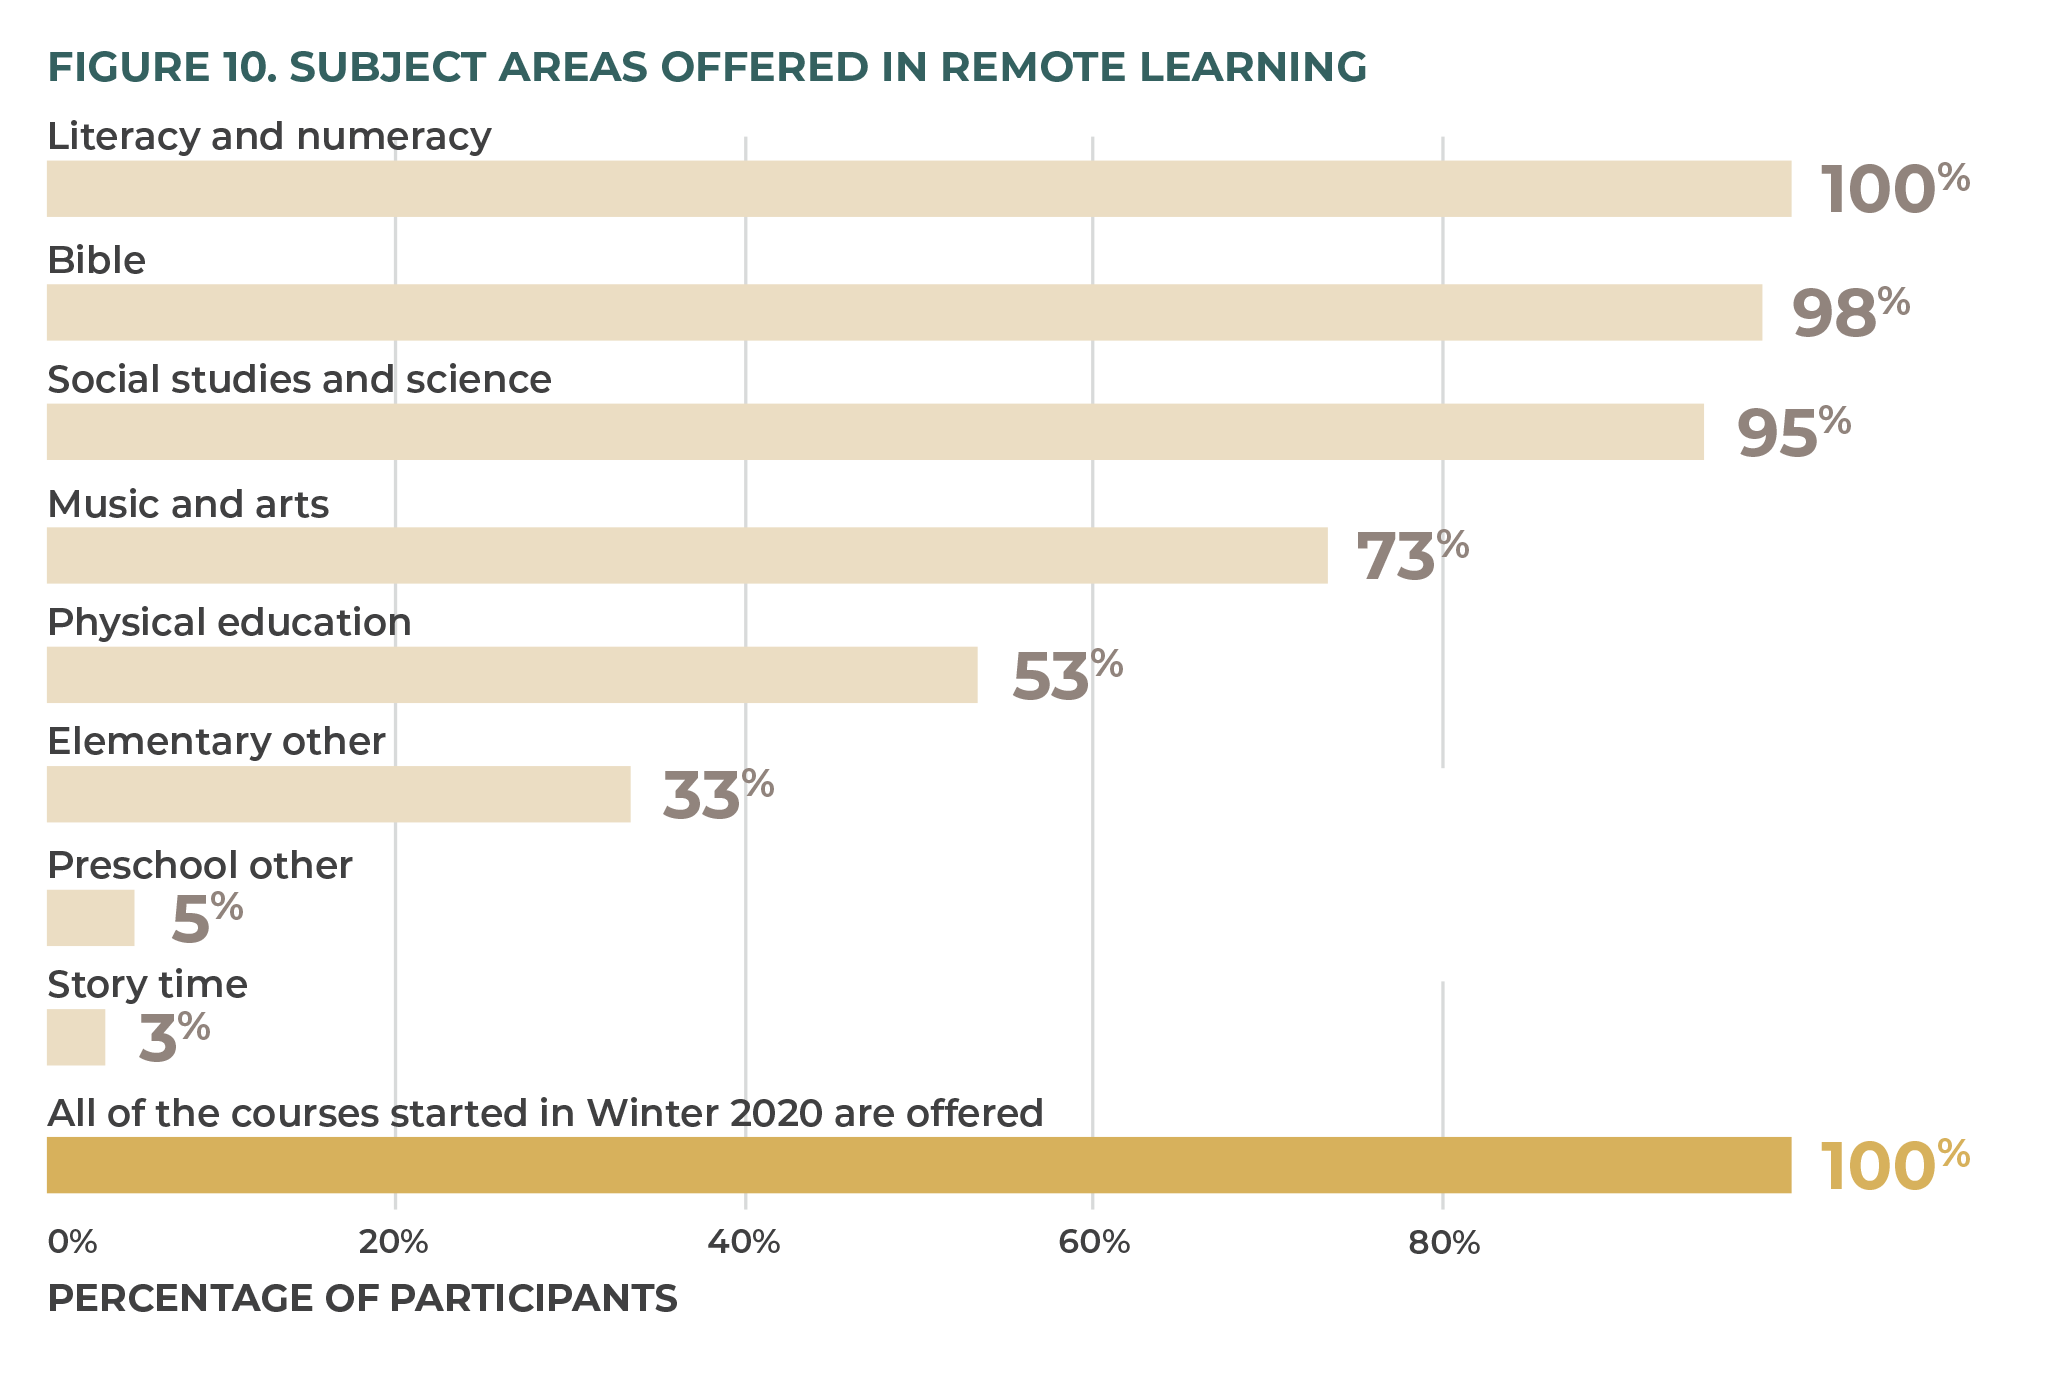 Figure 10. Subject Areas Offered in Remote Learning.